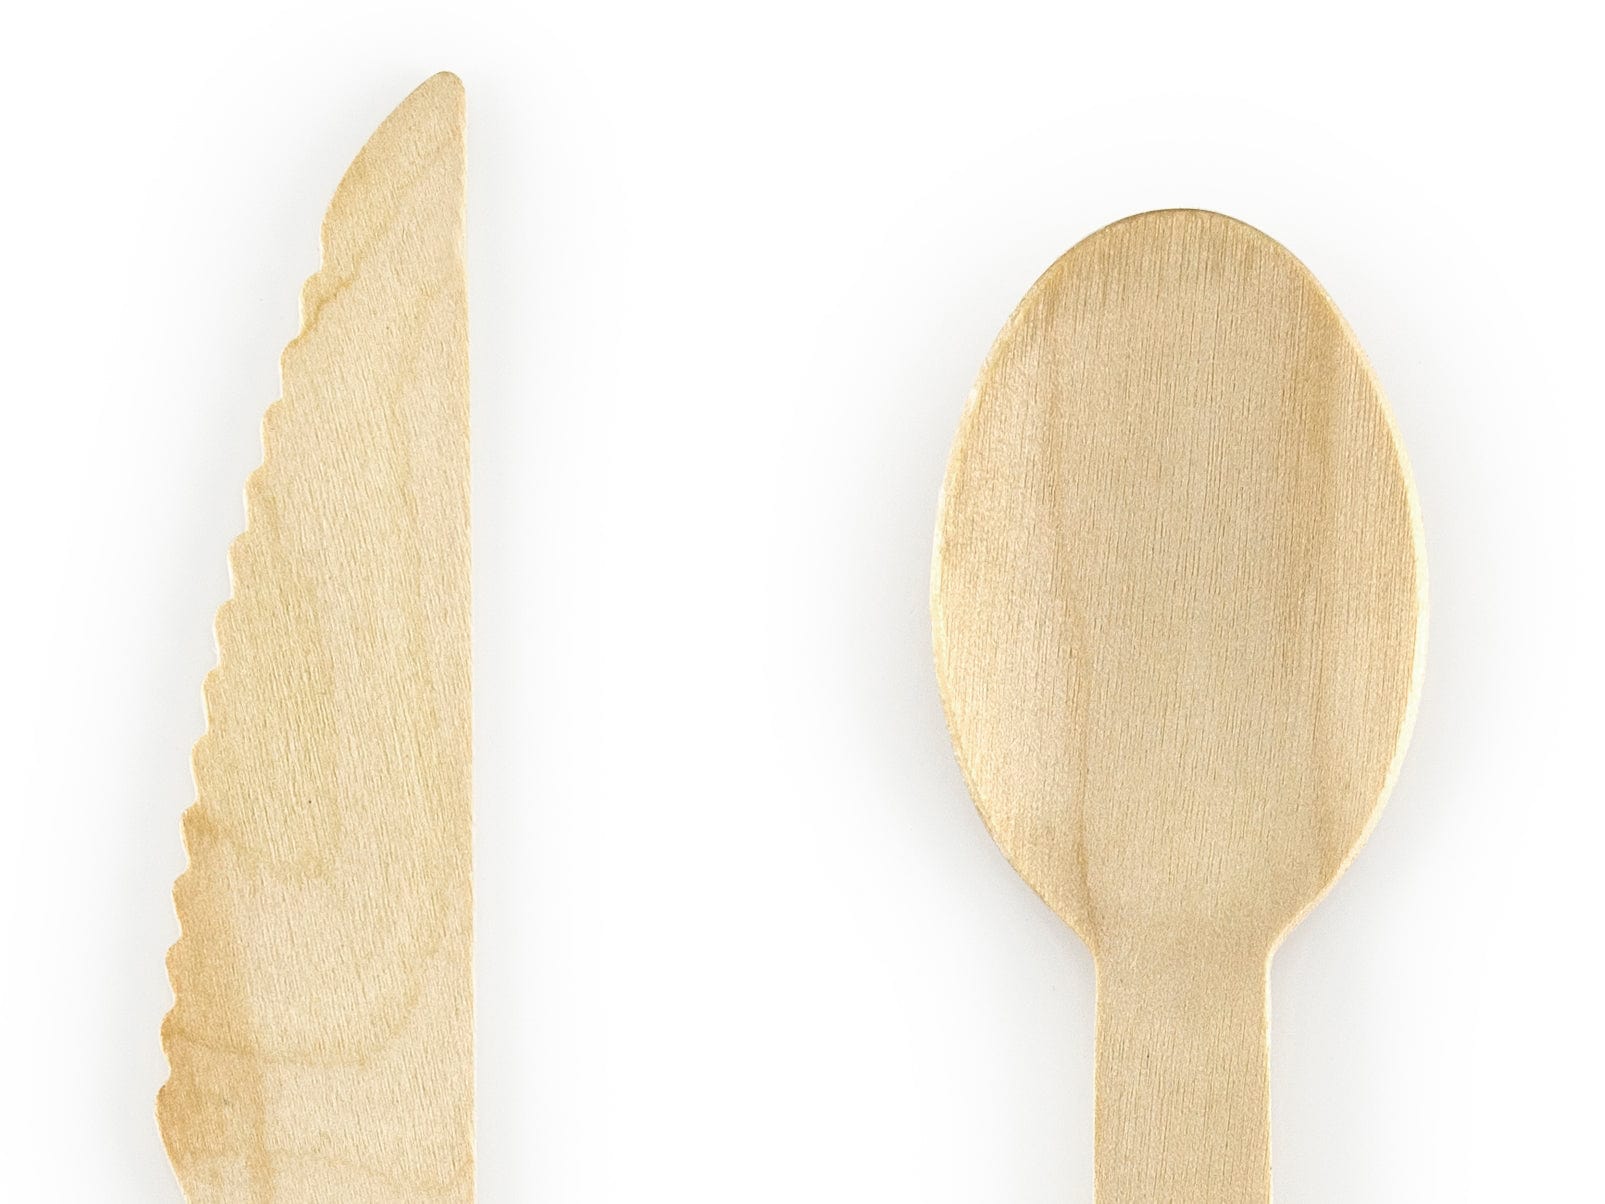 Black Wooden Cutlery | Natural Eco Party Supplies UK Party Deco